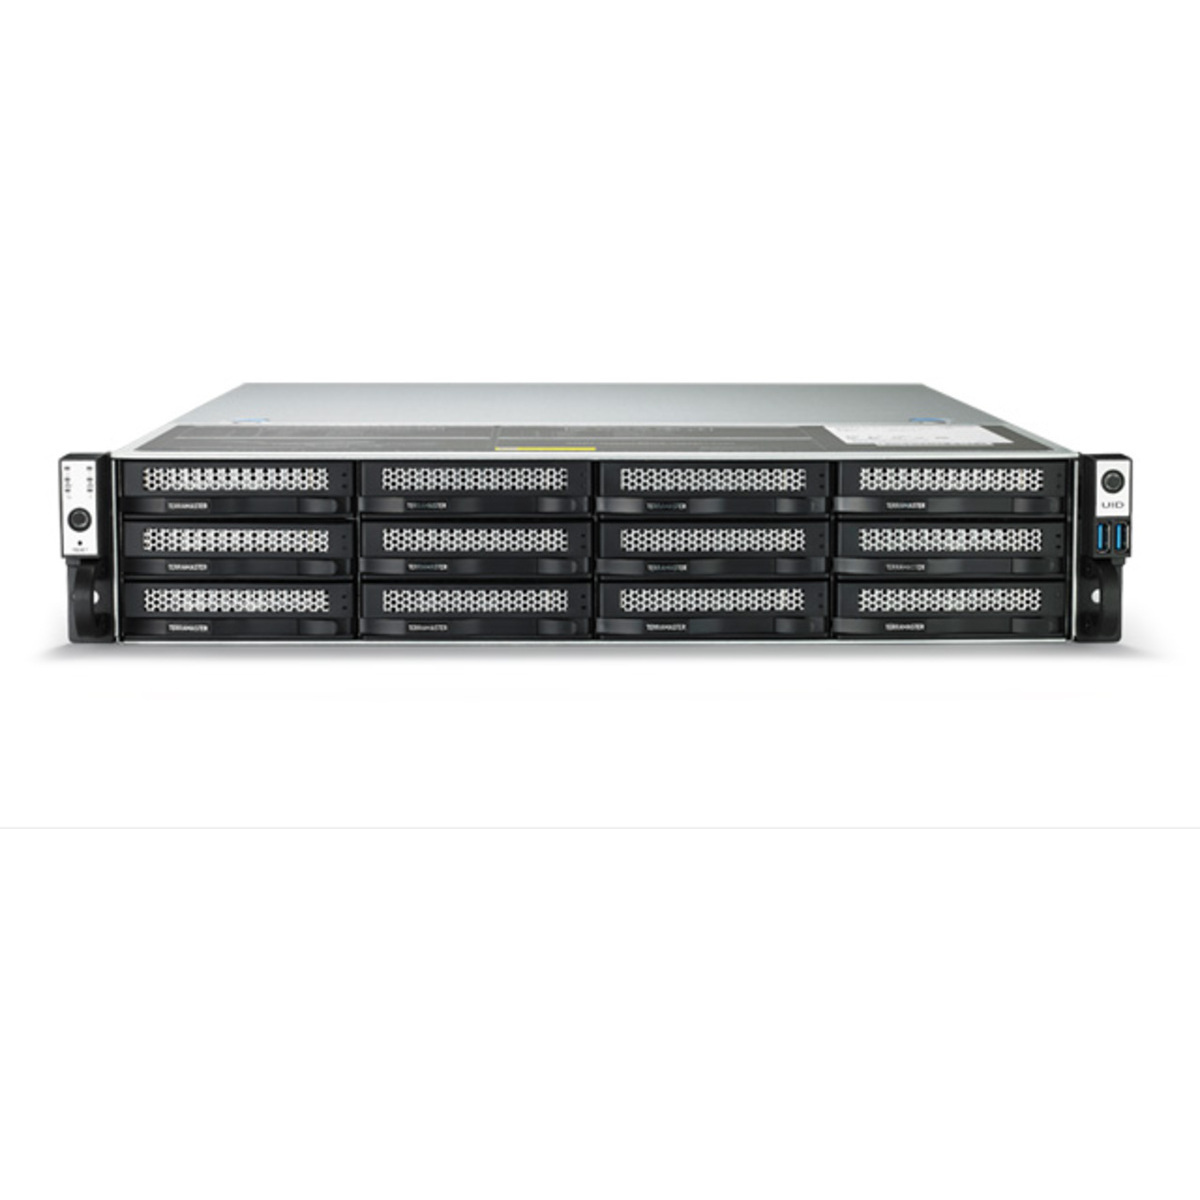 TerraMaster U12-722-2224 140tb 12-Bay RackMount Large Business / Enterprise NAS - Network Attached Storage Device 10x14tb Seagate EXOS X18 ST14000NM000J 3.5 7200rpm SATA 6Gb/s HDD ENTERPRISE Class Drives Installed - Burn-In Tested U12-722-2224